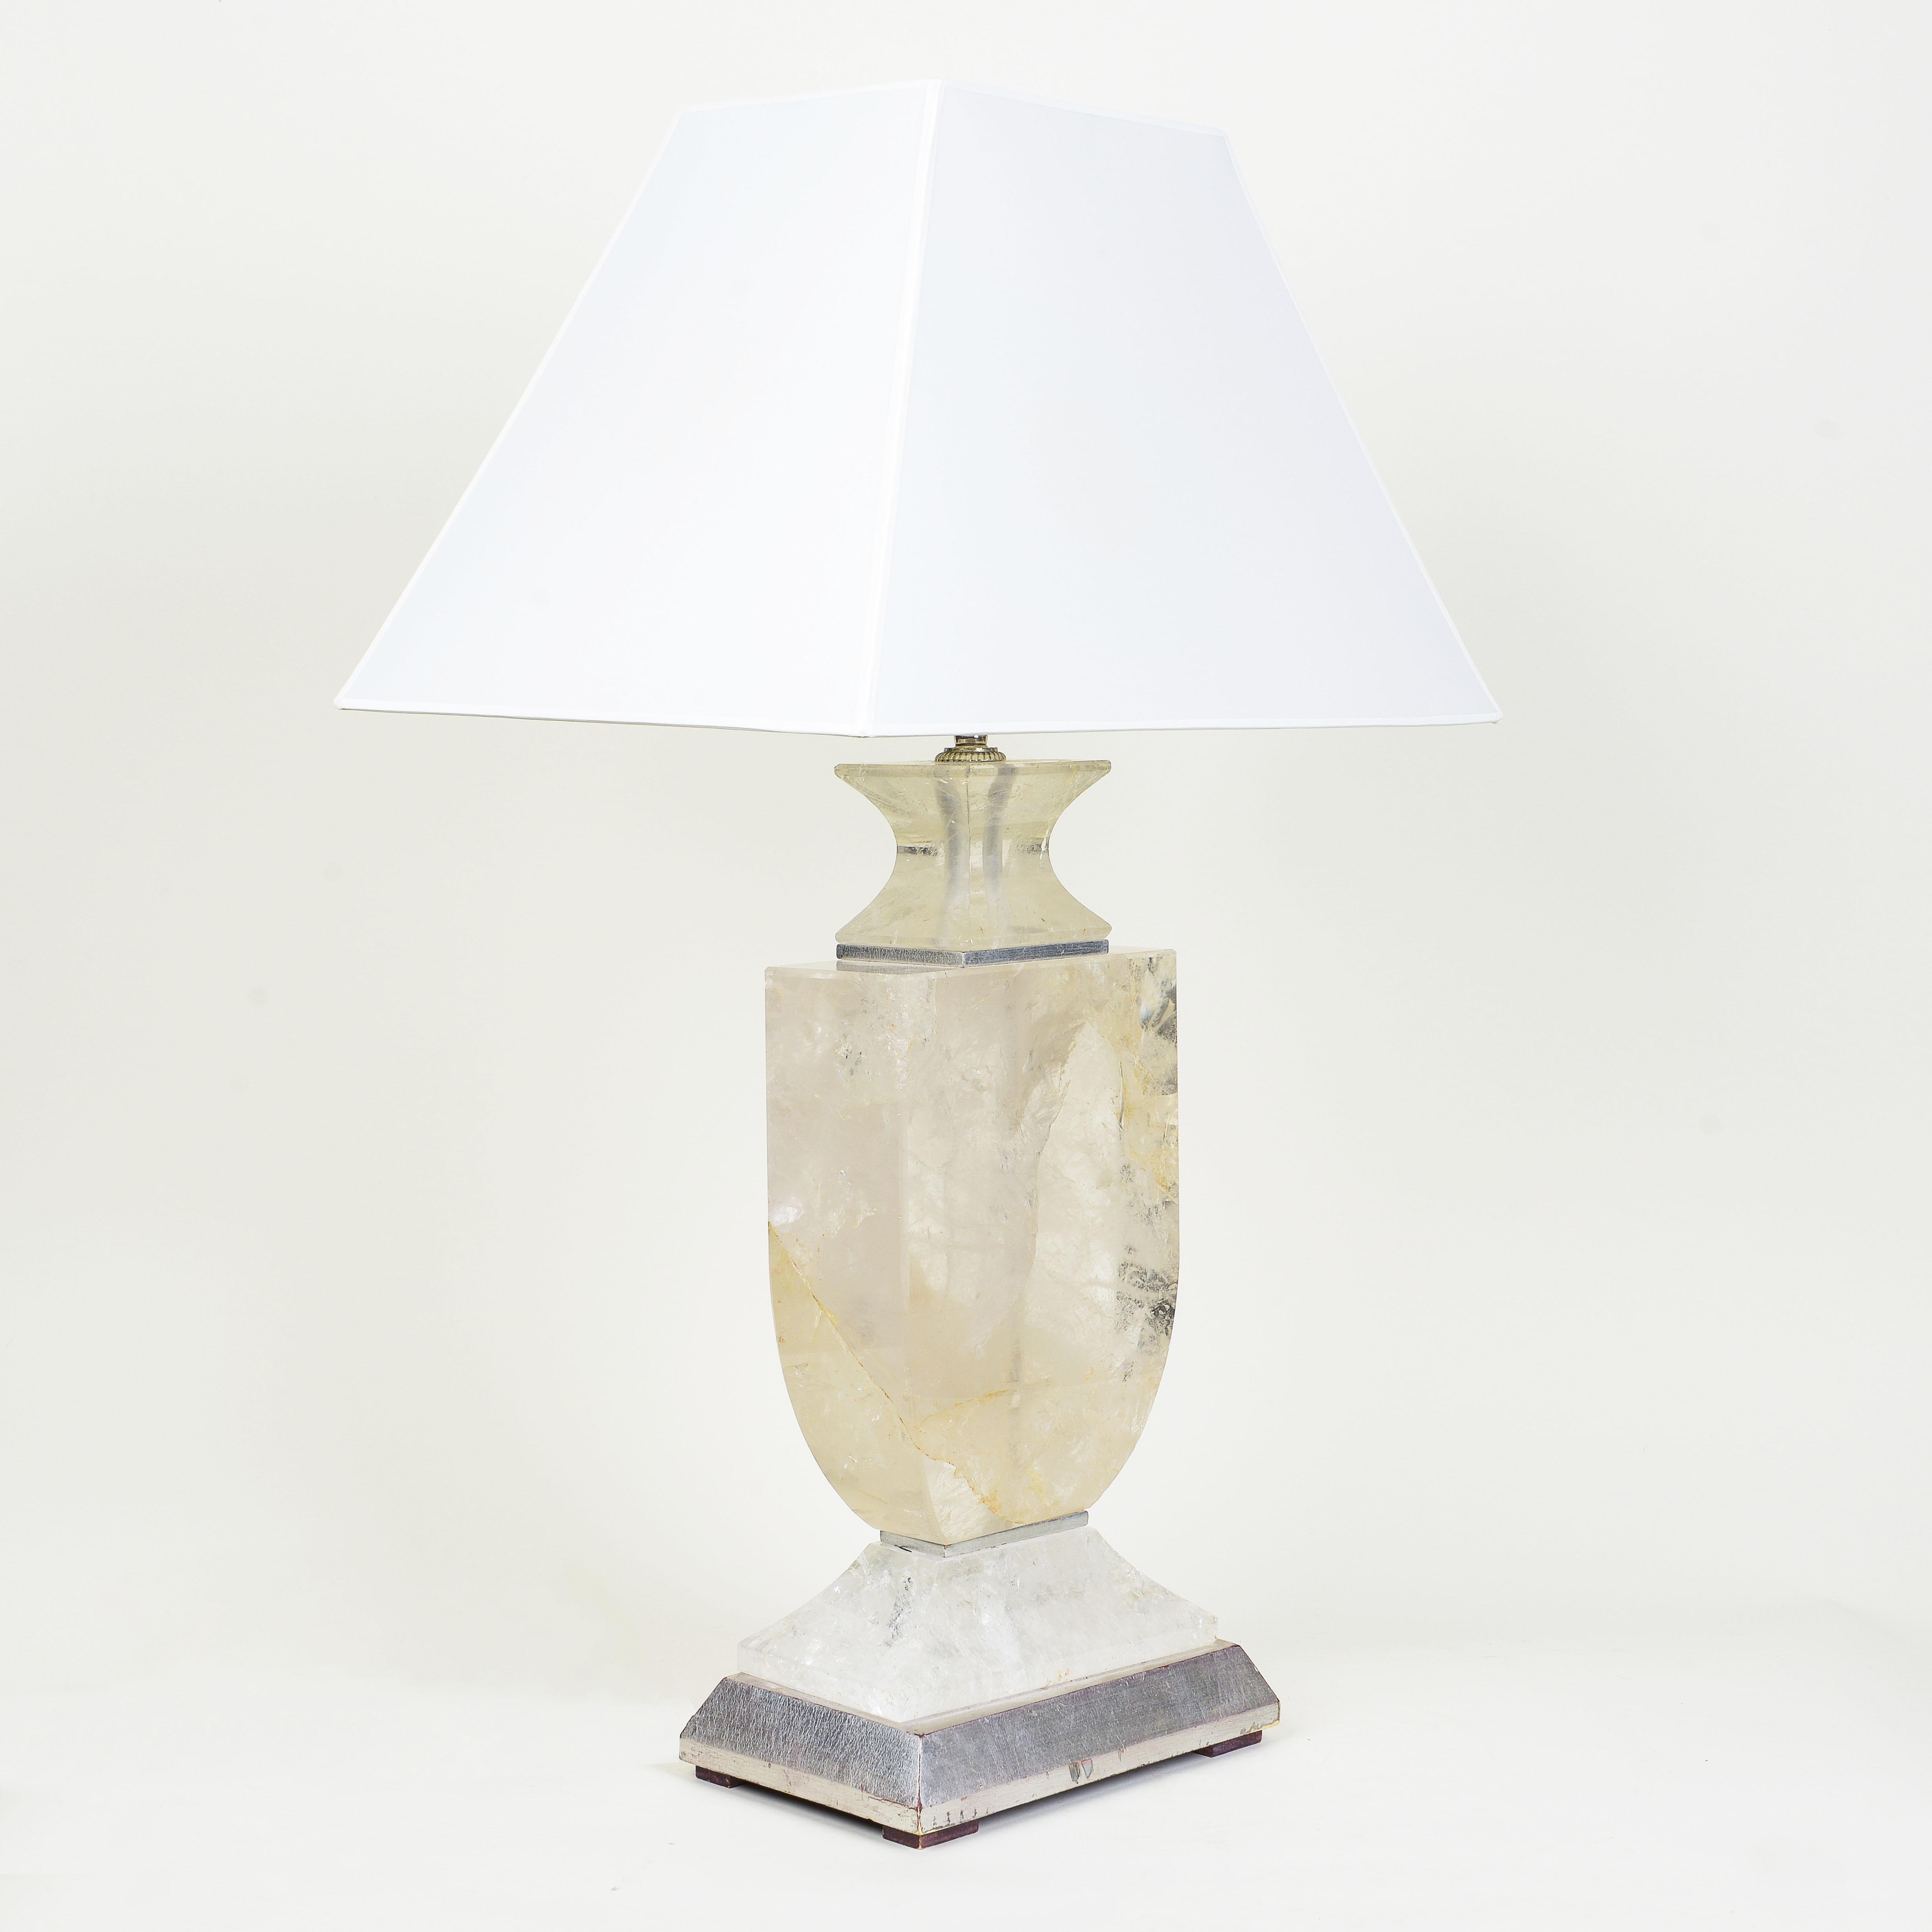 A quartz table lamp with an elegant inward tapering design, resting on a rectangular base. Acquired from the Doyle Belle Époque 19th and 20th Century Decorative Arts.